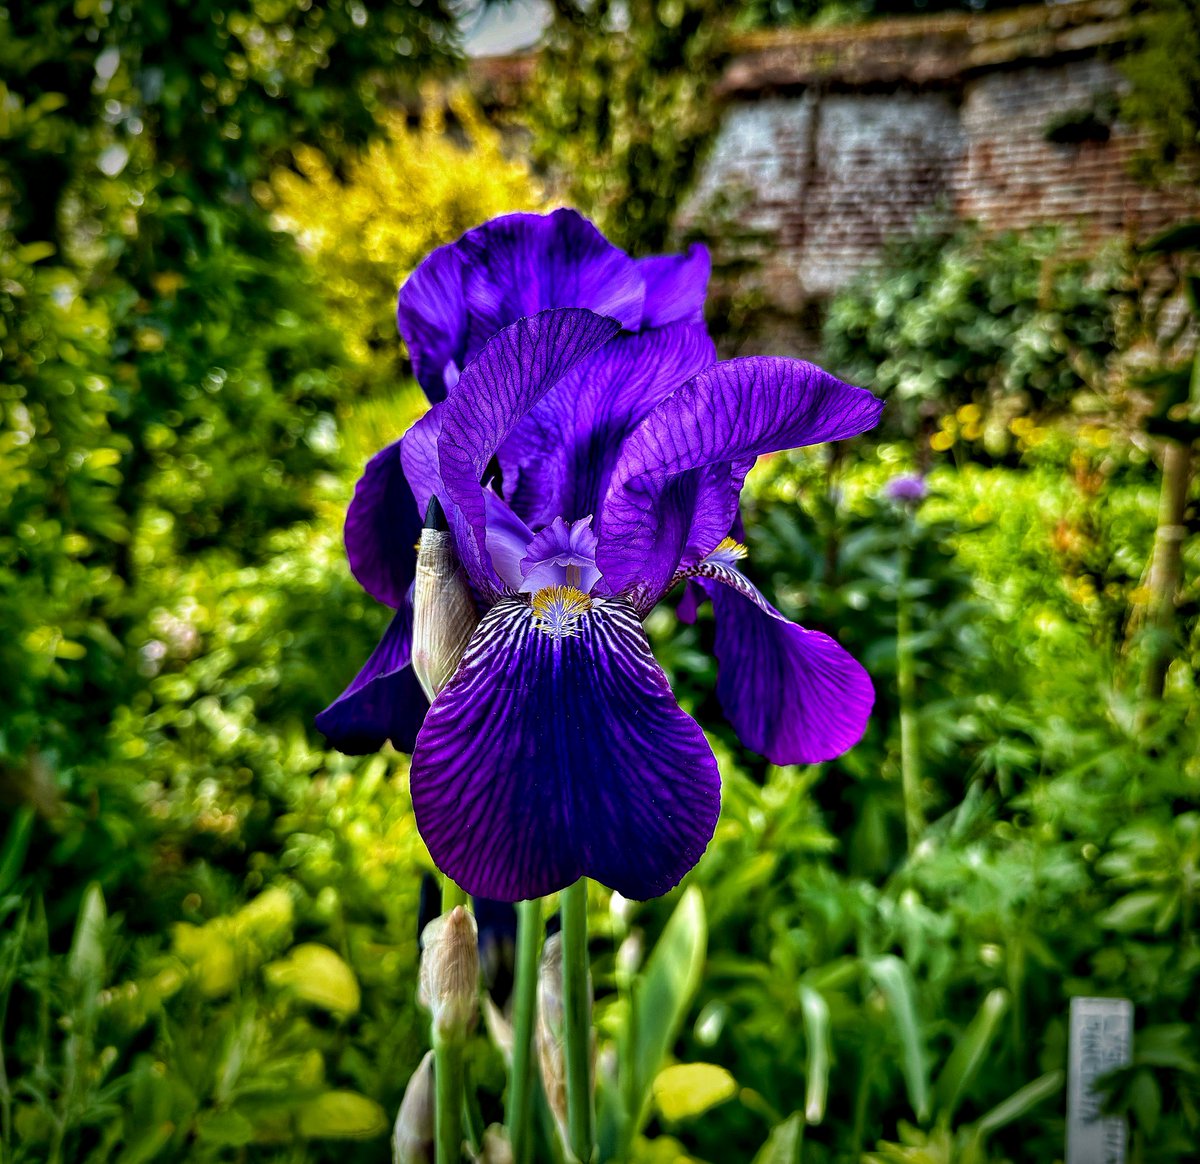 A beautiful Iris in the Elizabethan #garden at Burton Agnes Manor House in Yorkshire last weekend #flowers #nature #spring #iphonephotography